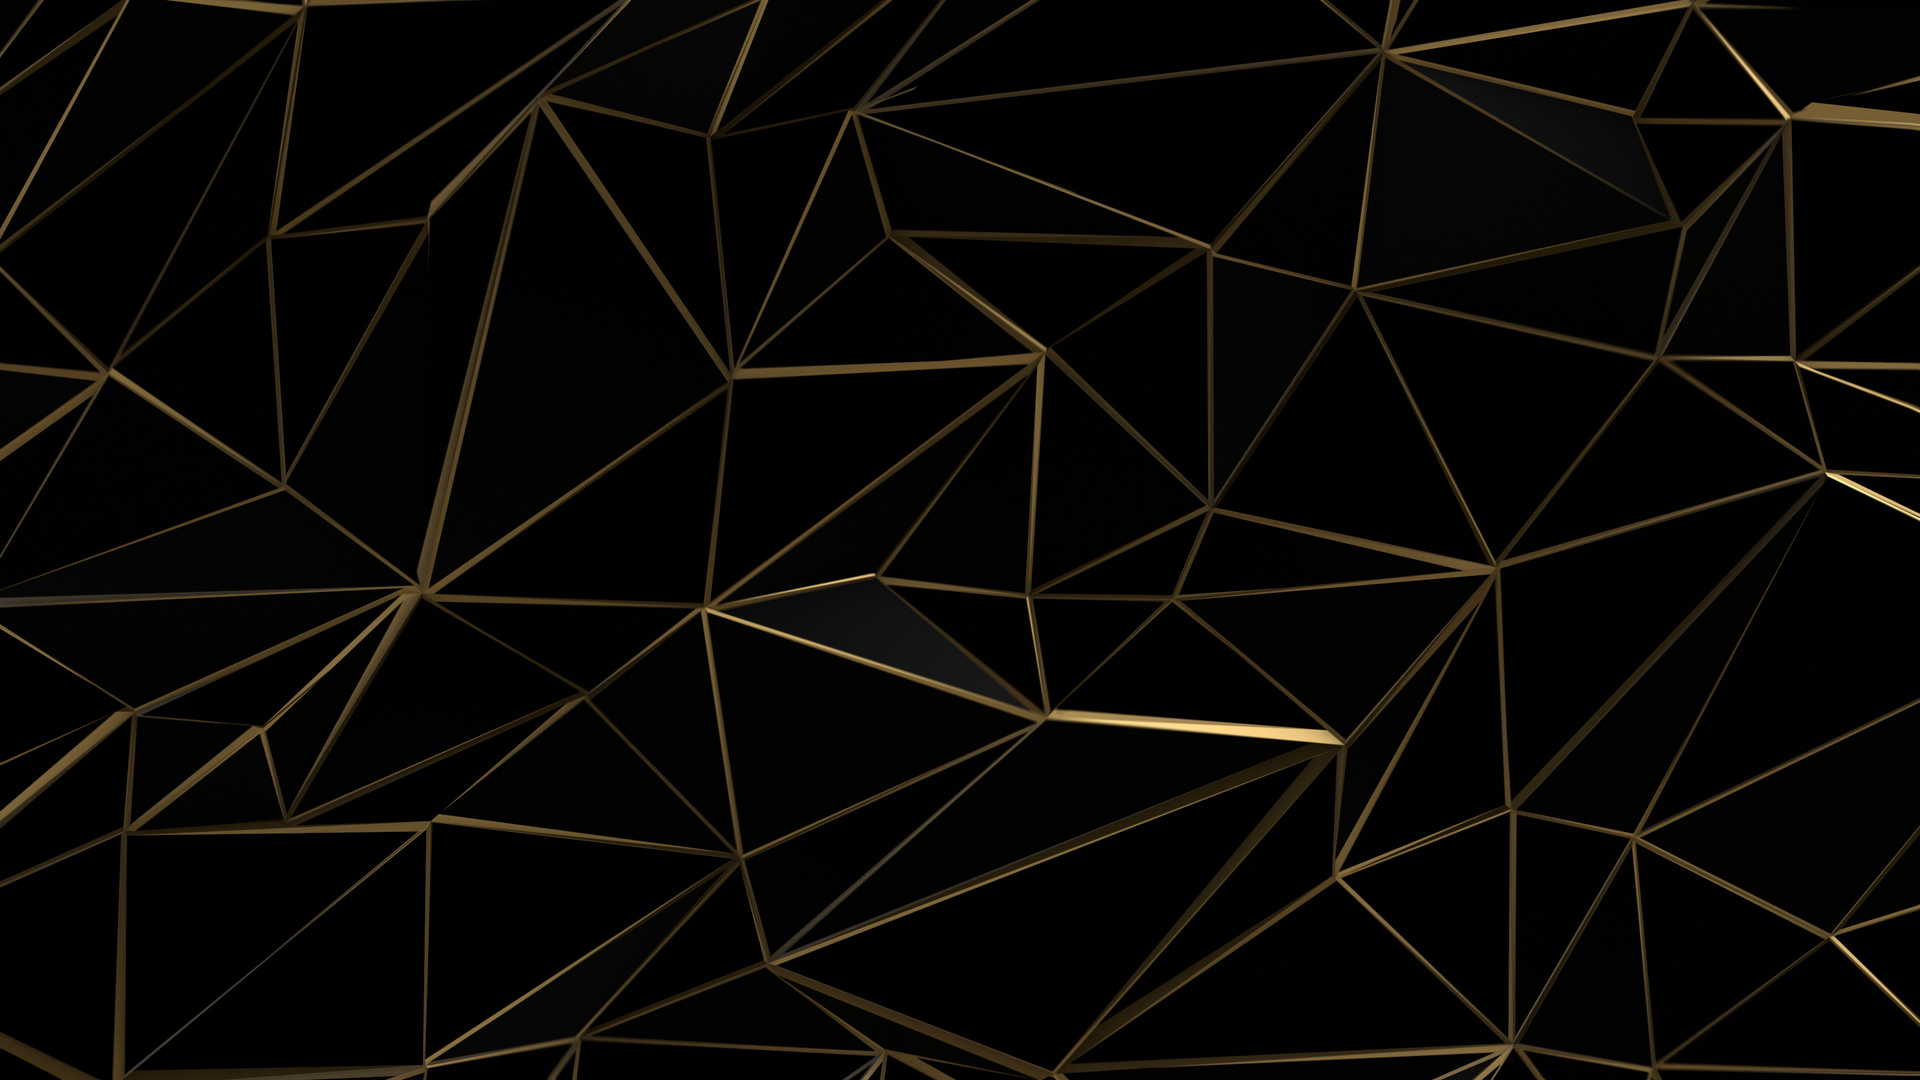 Black and gold abstract low poly triangle background